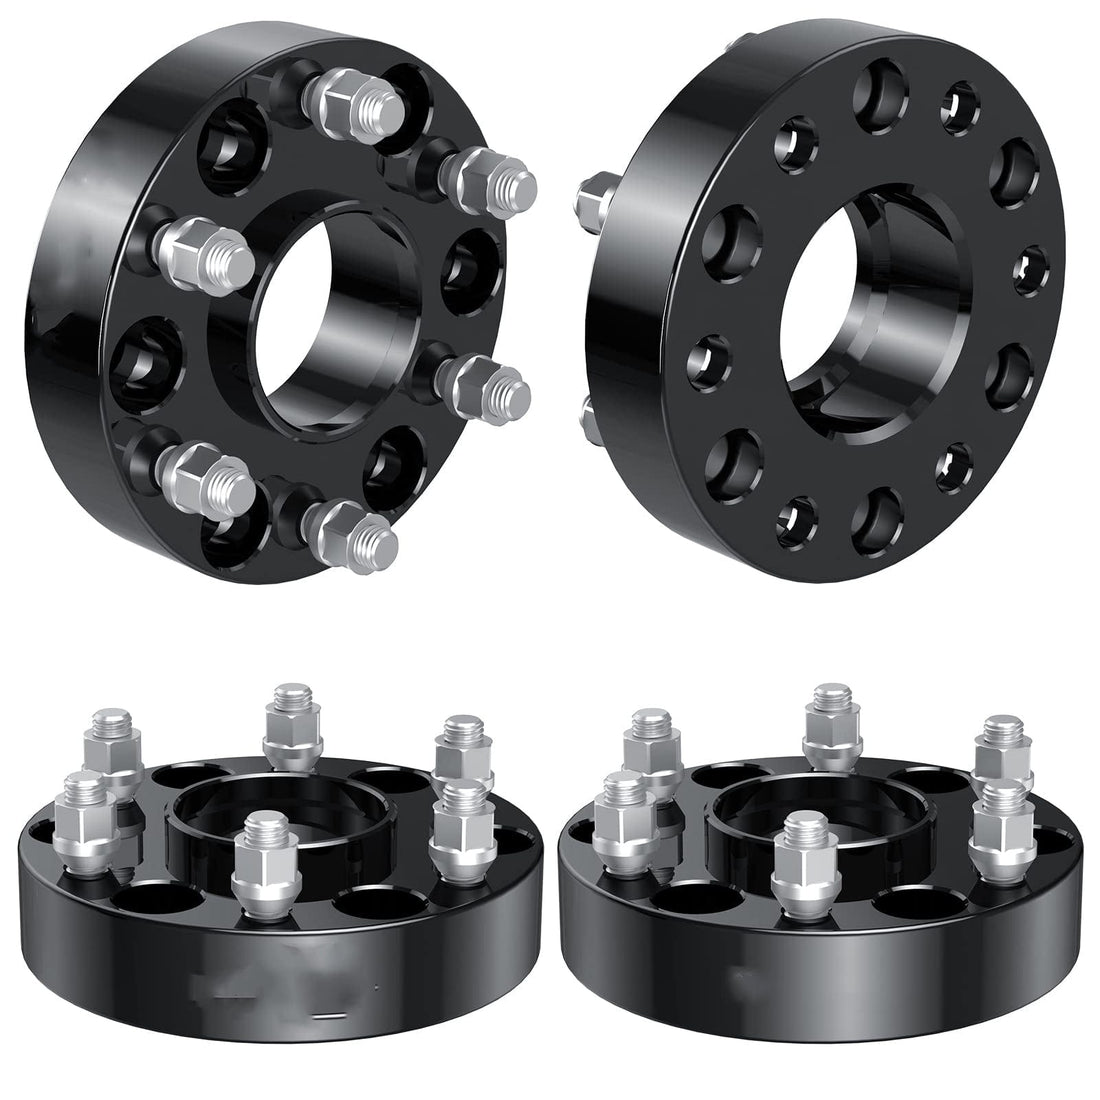 GARVEE 6x5.5 Wheel Spacers Compatible with 2019-2020 Ram 1500, 1.5" Forged Hub Centric M14X1.5 Stud Hub Bore 77.8mm